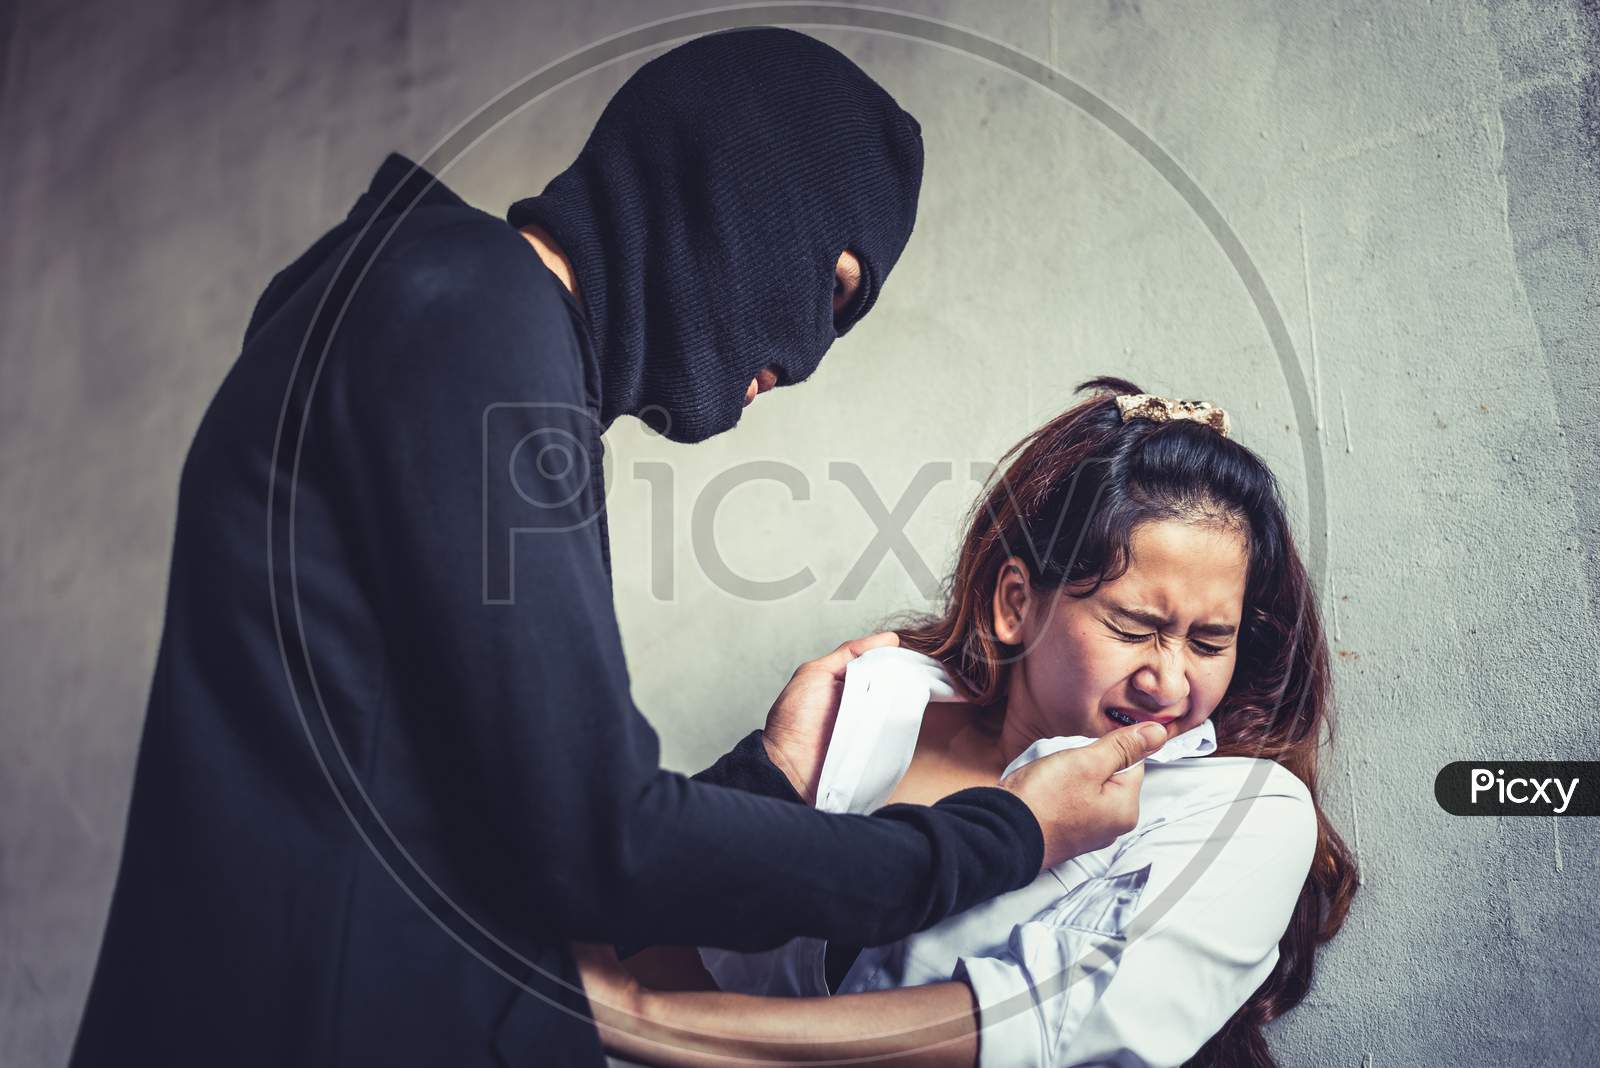 Robber Or Thief Force Woman To Take Off Her Clothes And Raping In Abandoned House. Criminal Sexual And Illegal Violence Crisis Concept. Social Issues And Problem Concept